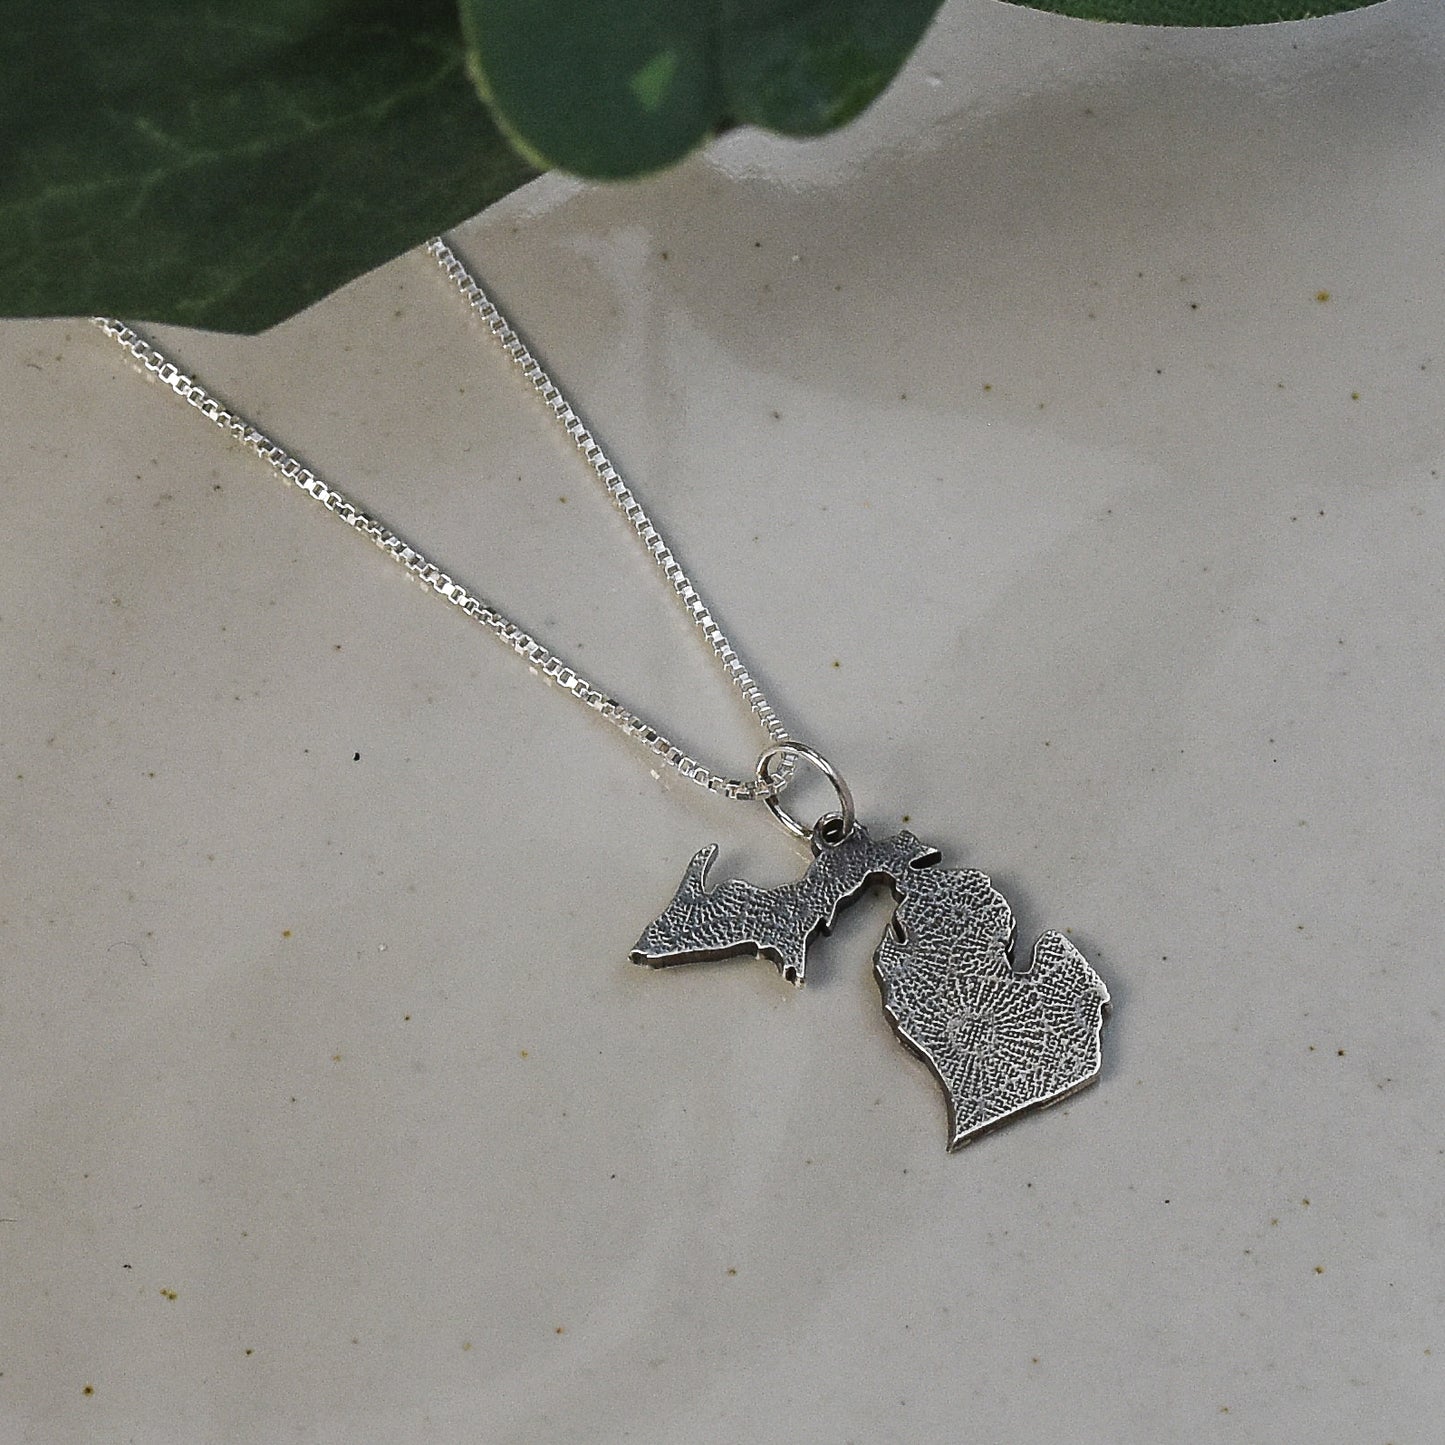 Engraved Petoskey Stone Print - State of Michigan Necklace